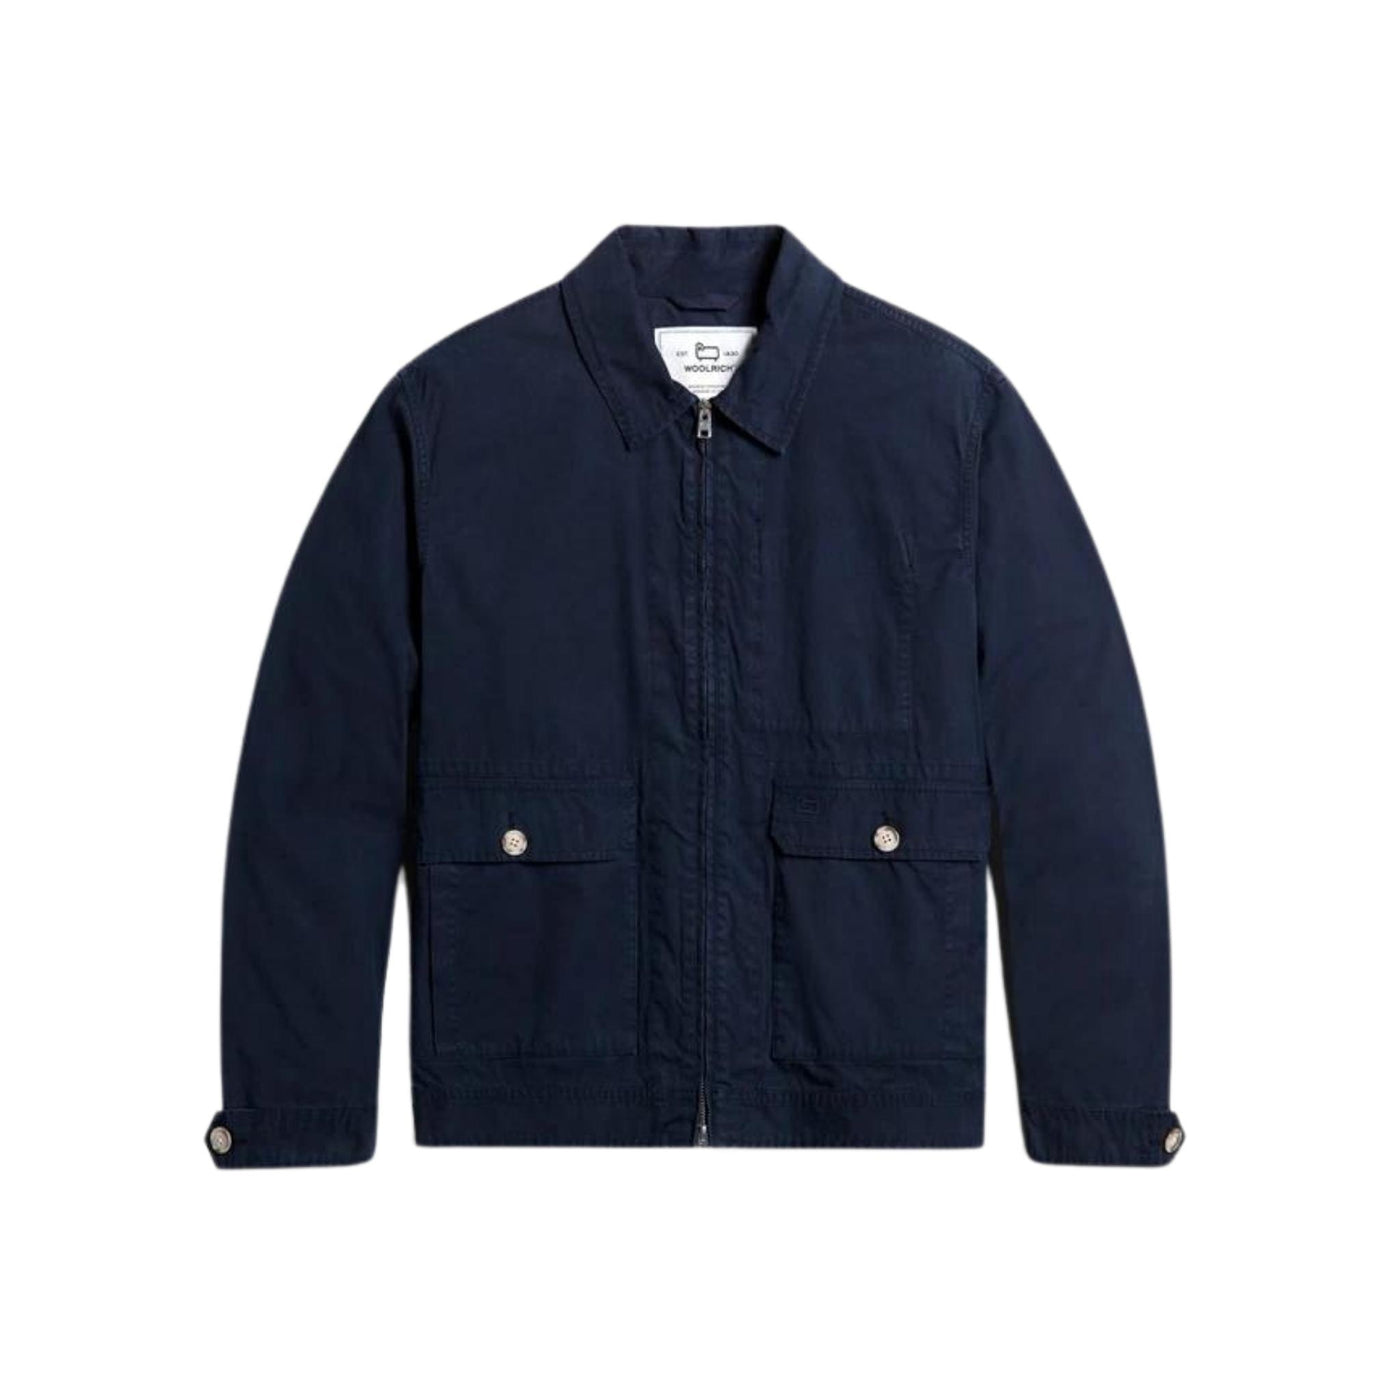 giacca uomo woolrich stile bomber in cotone blu